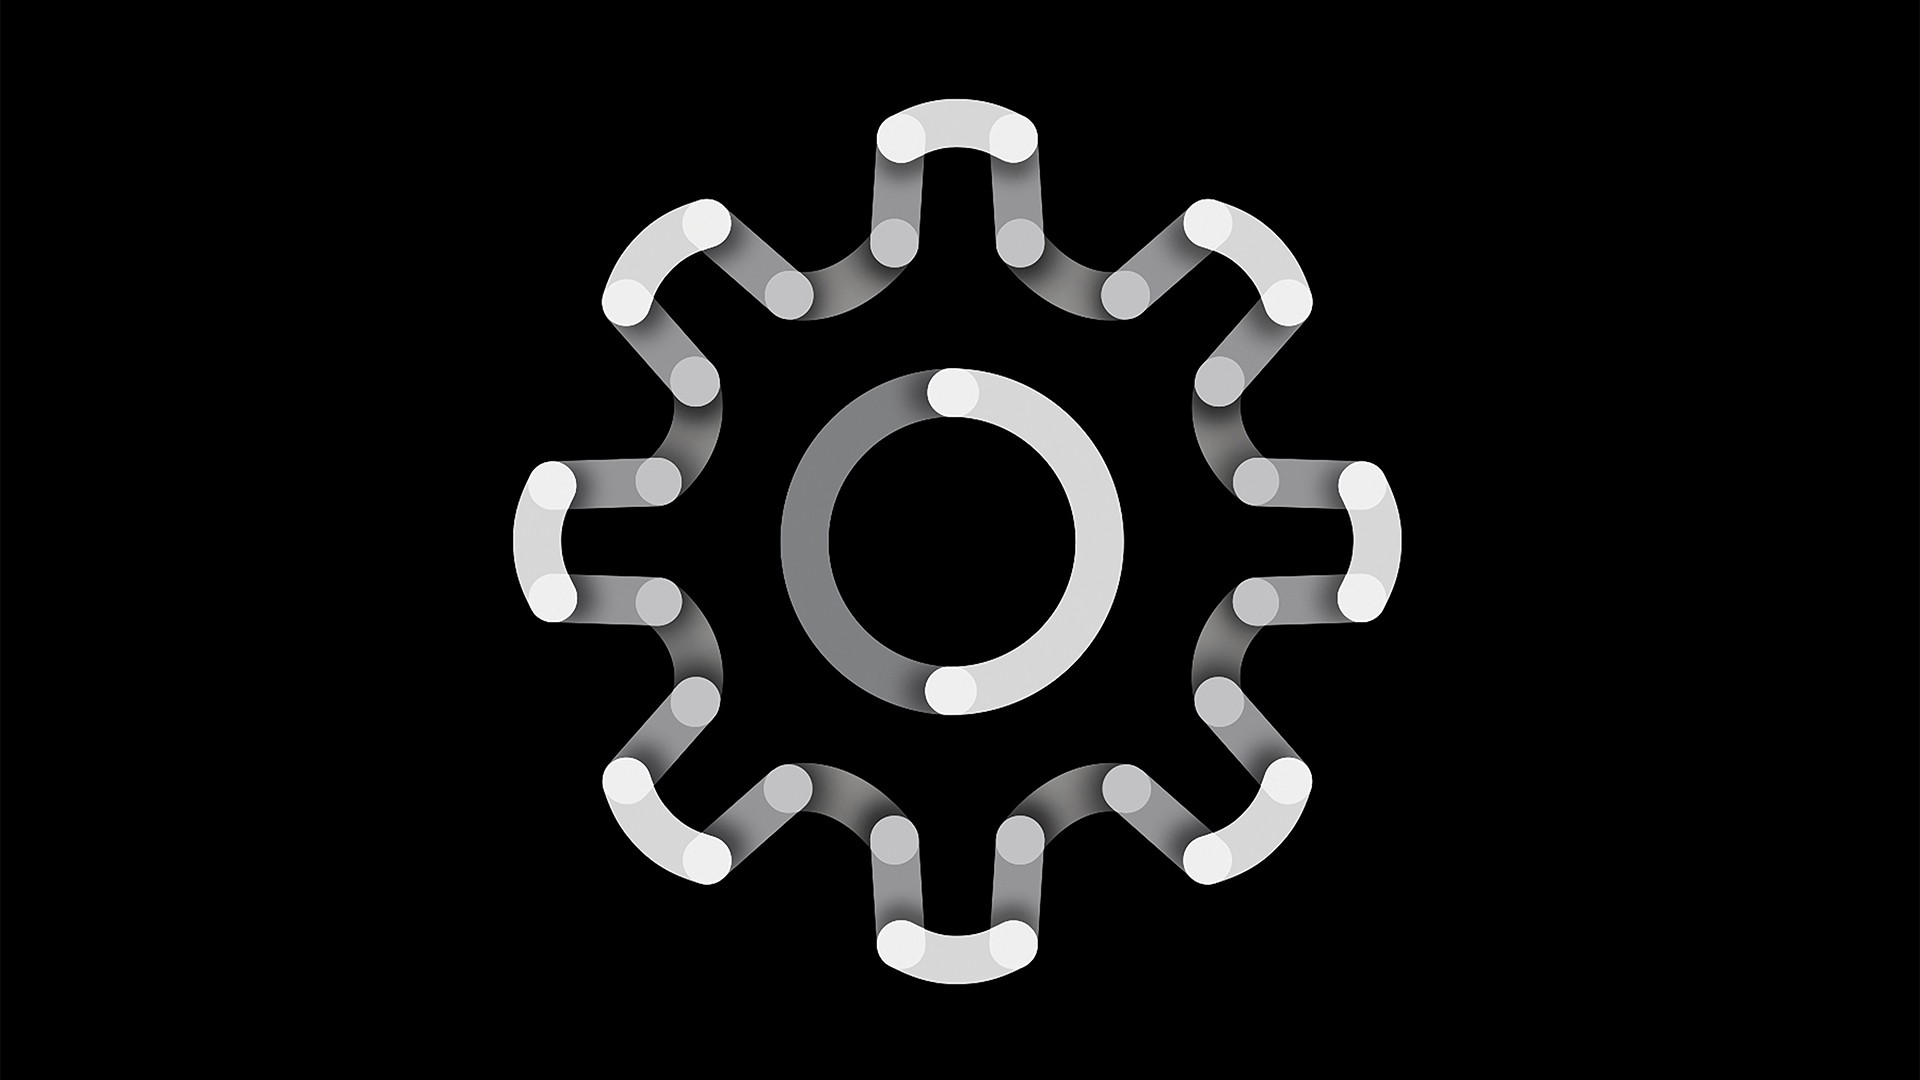 Logo that resembles a gear icon, composed by thick strokes that look like hinges.